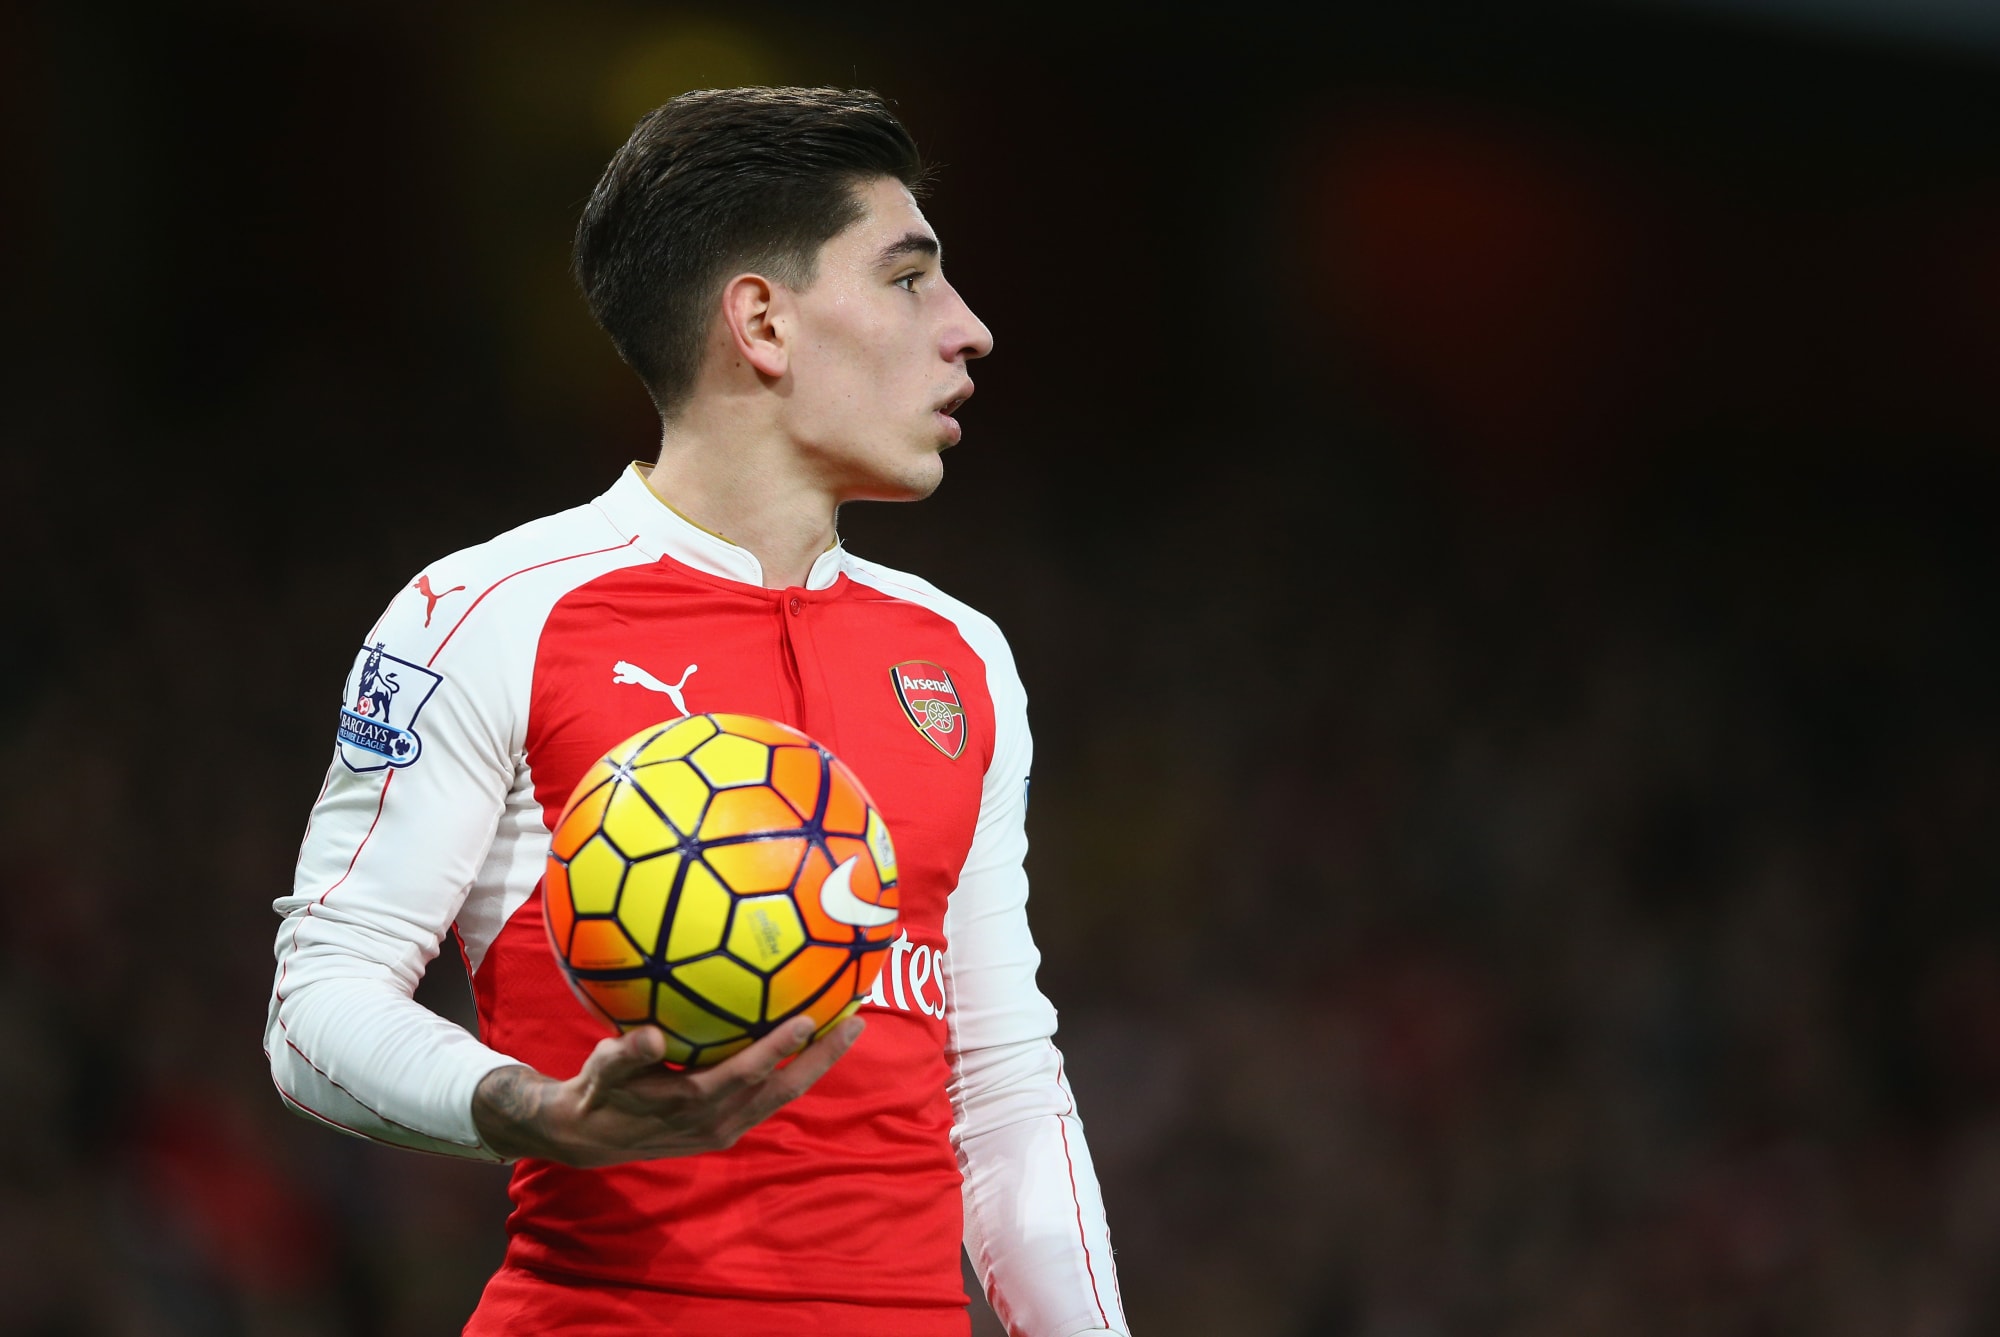 Arsenal's Hector Bellerin enjoys rare weekend off with a trip to